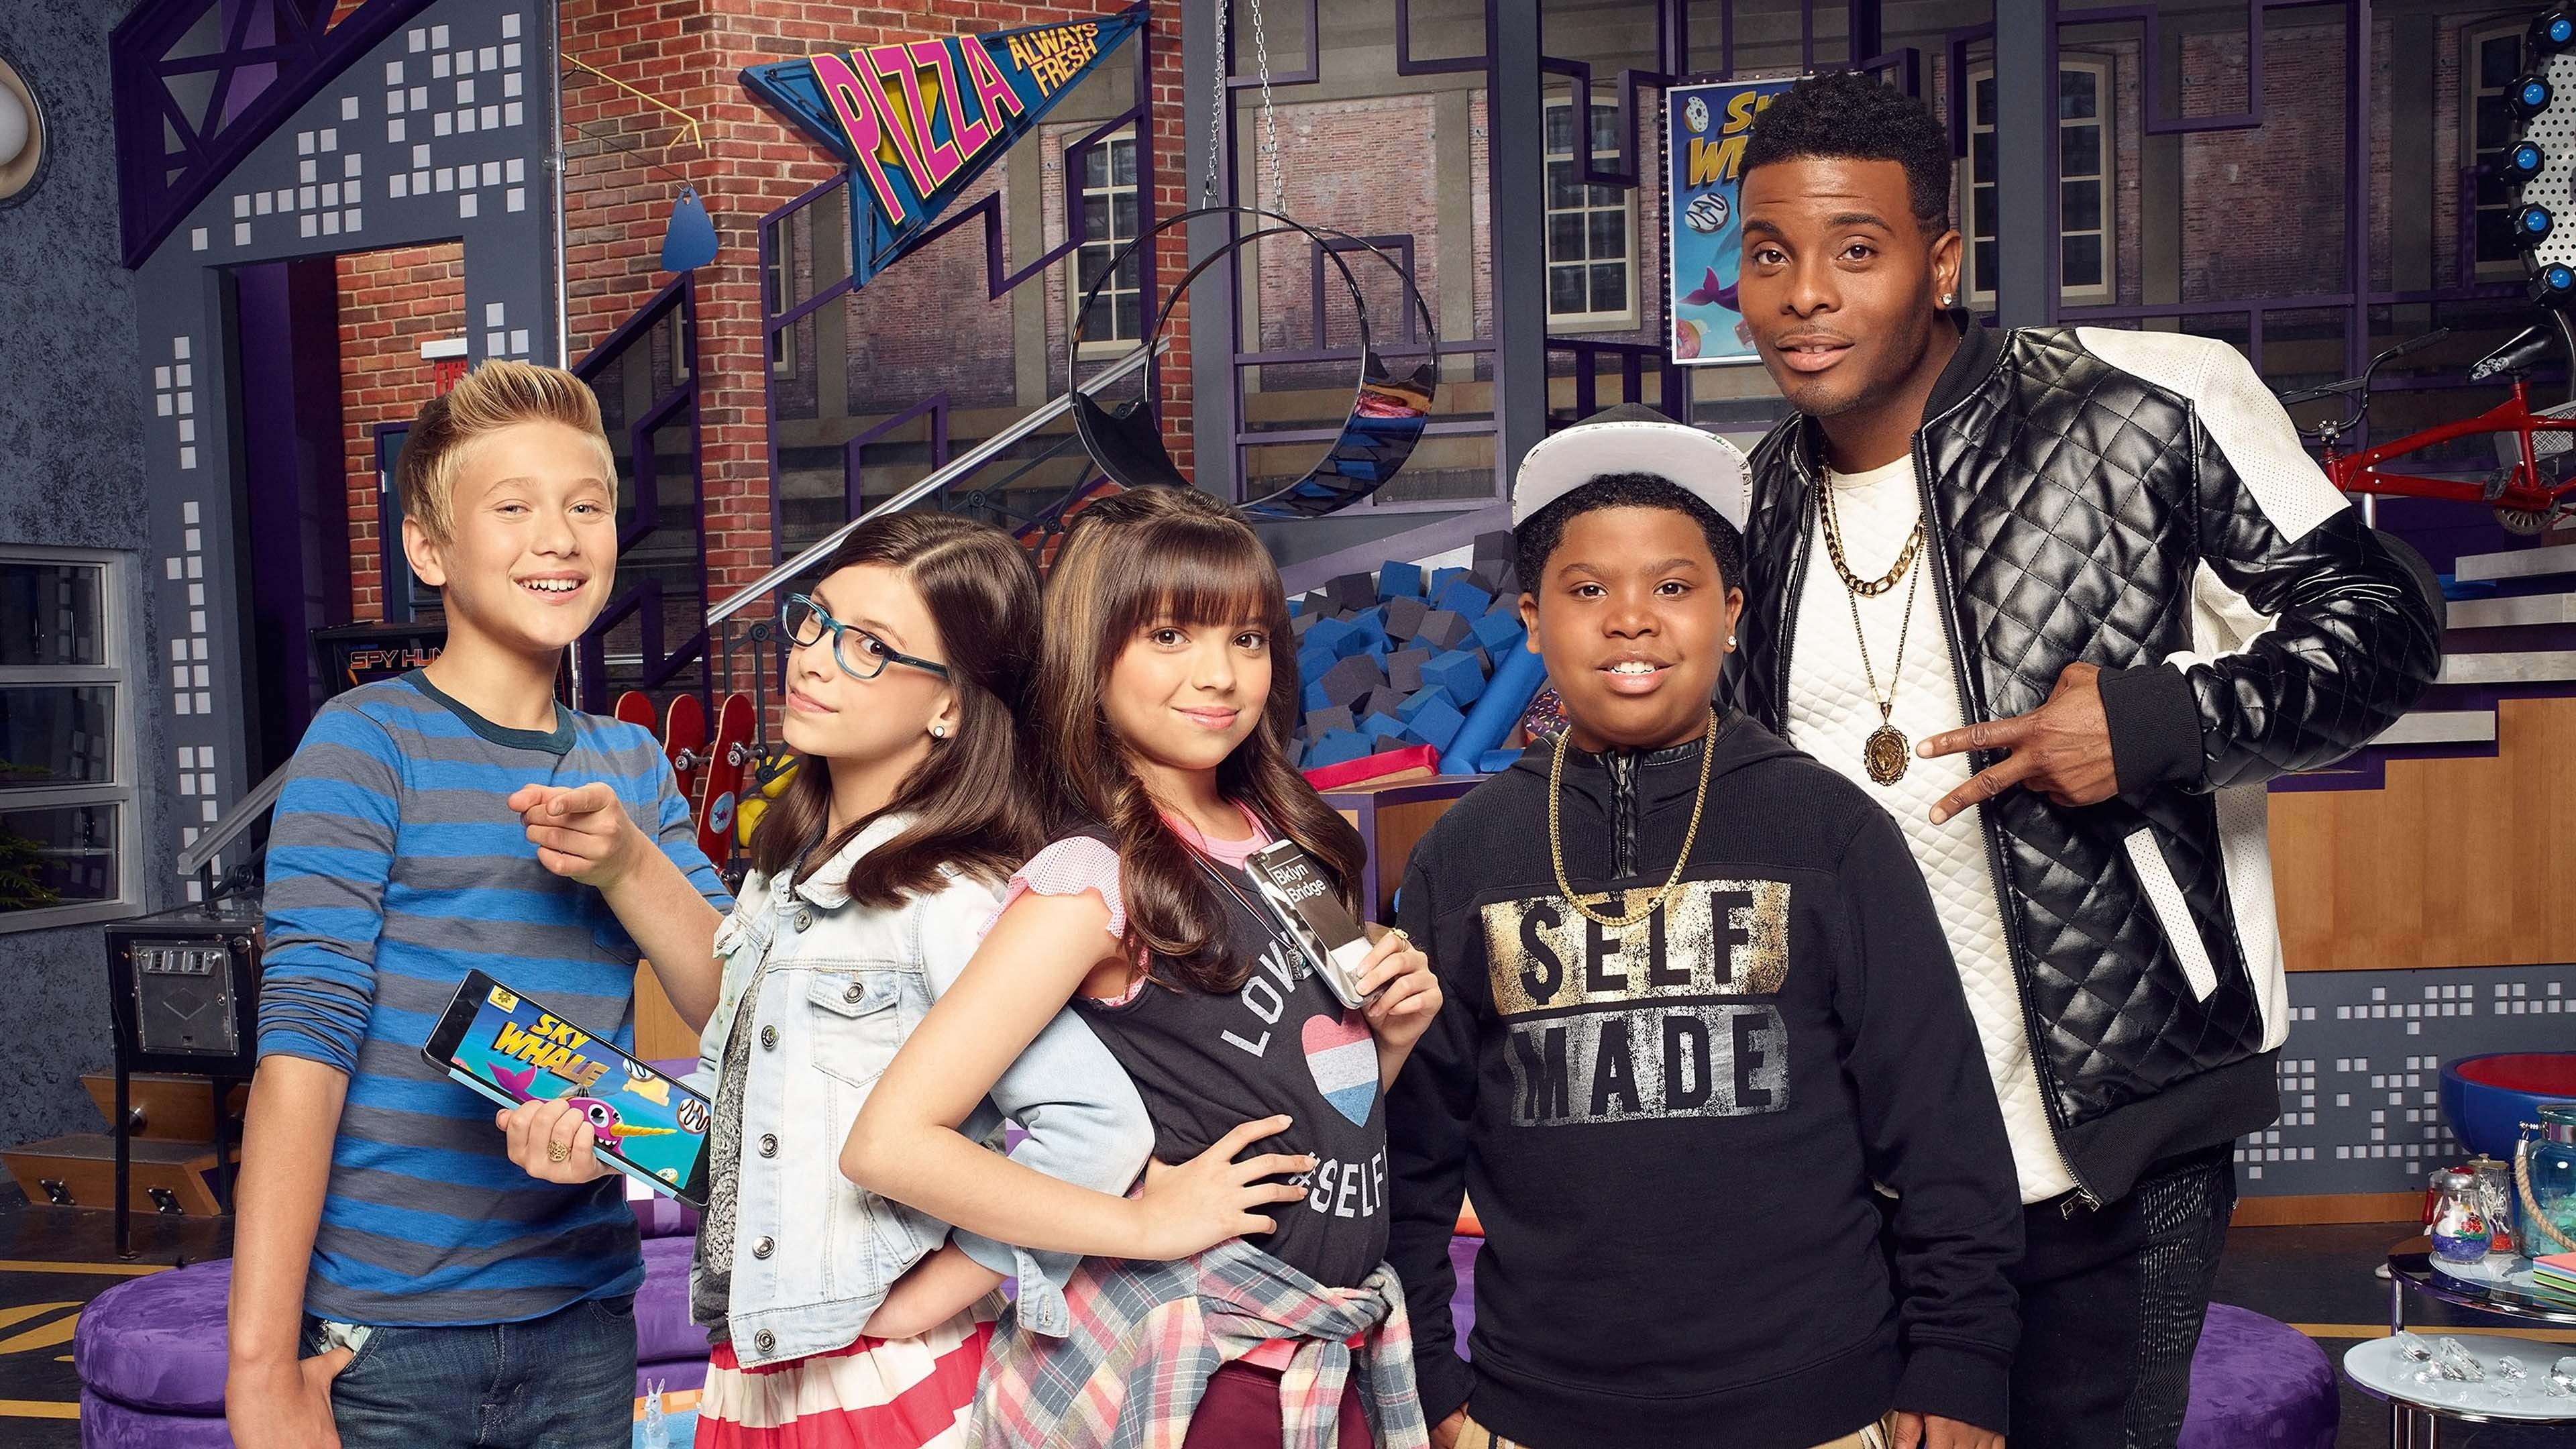 Game Shakers - watch tv show streaming online